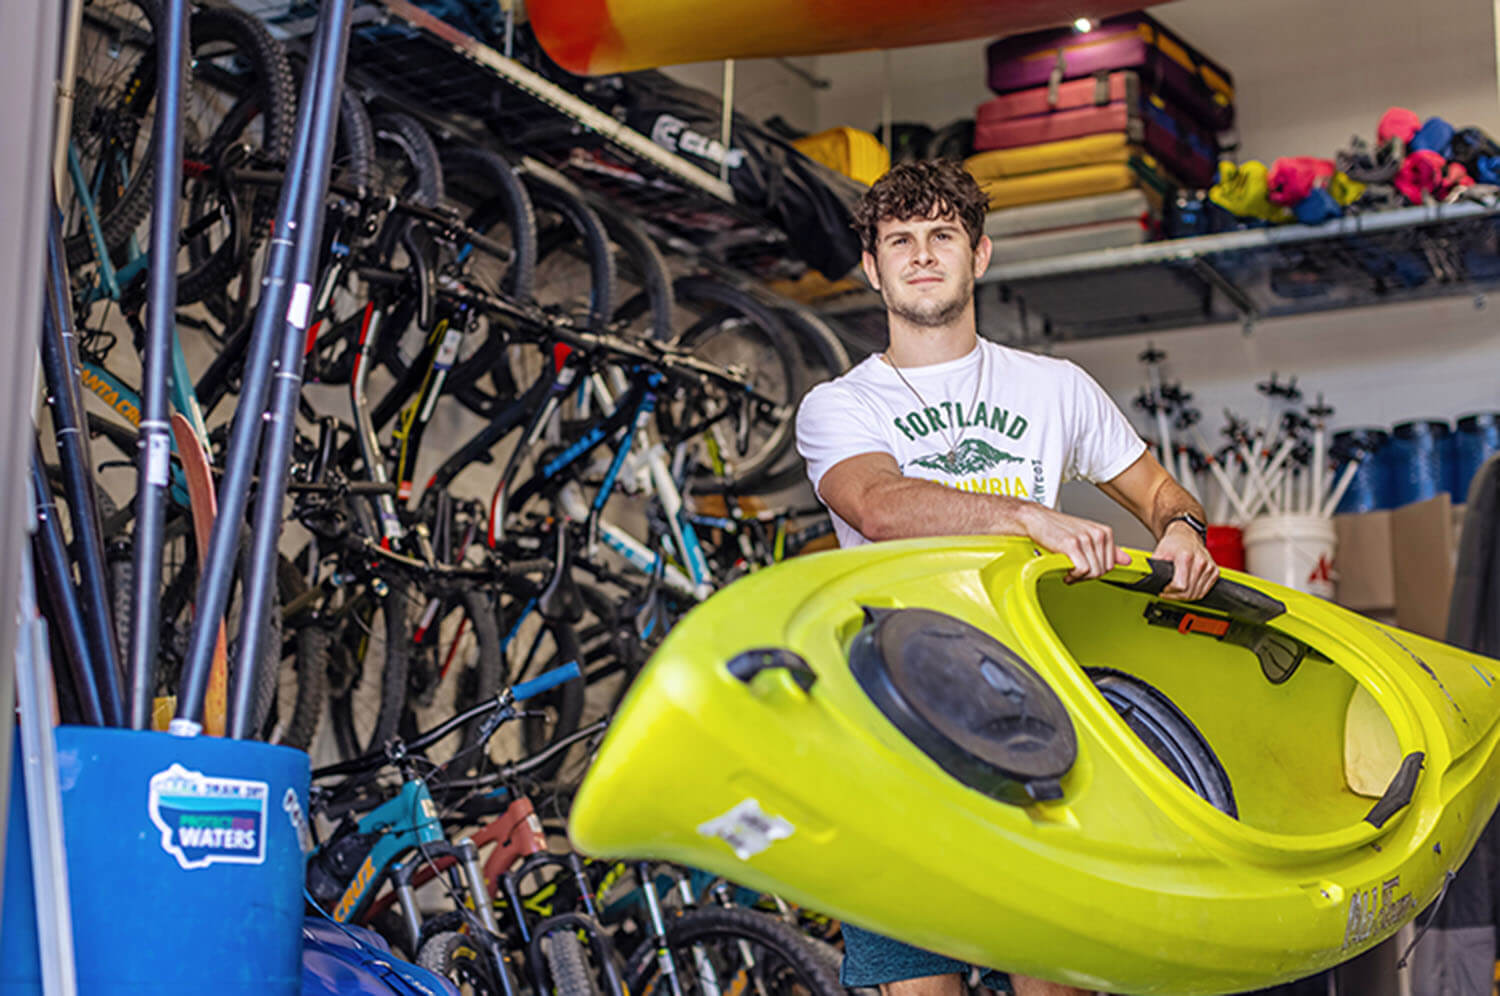 Student carries a bright kayak out of the storage facility